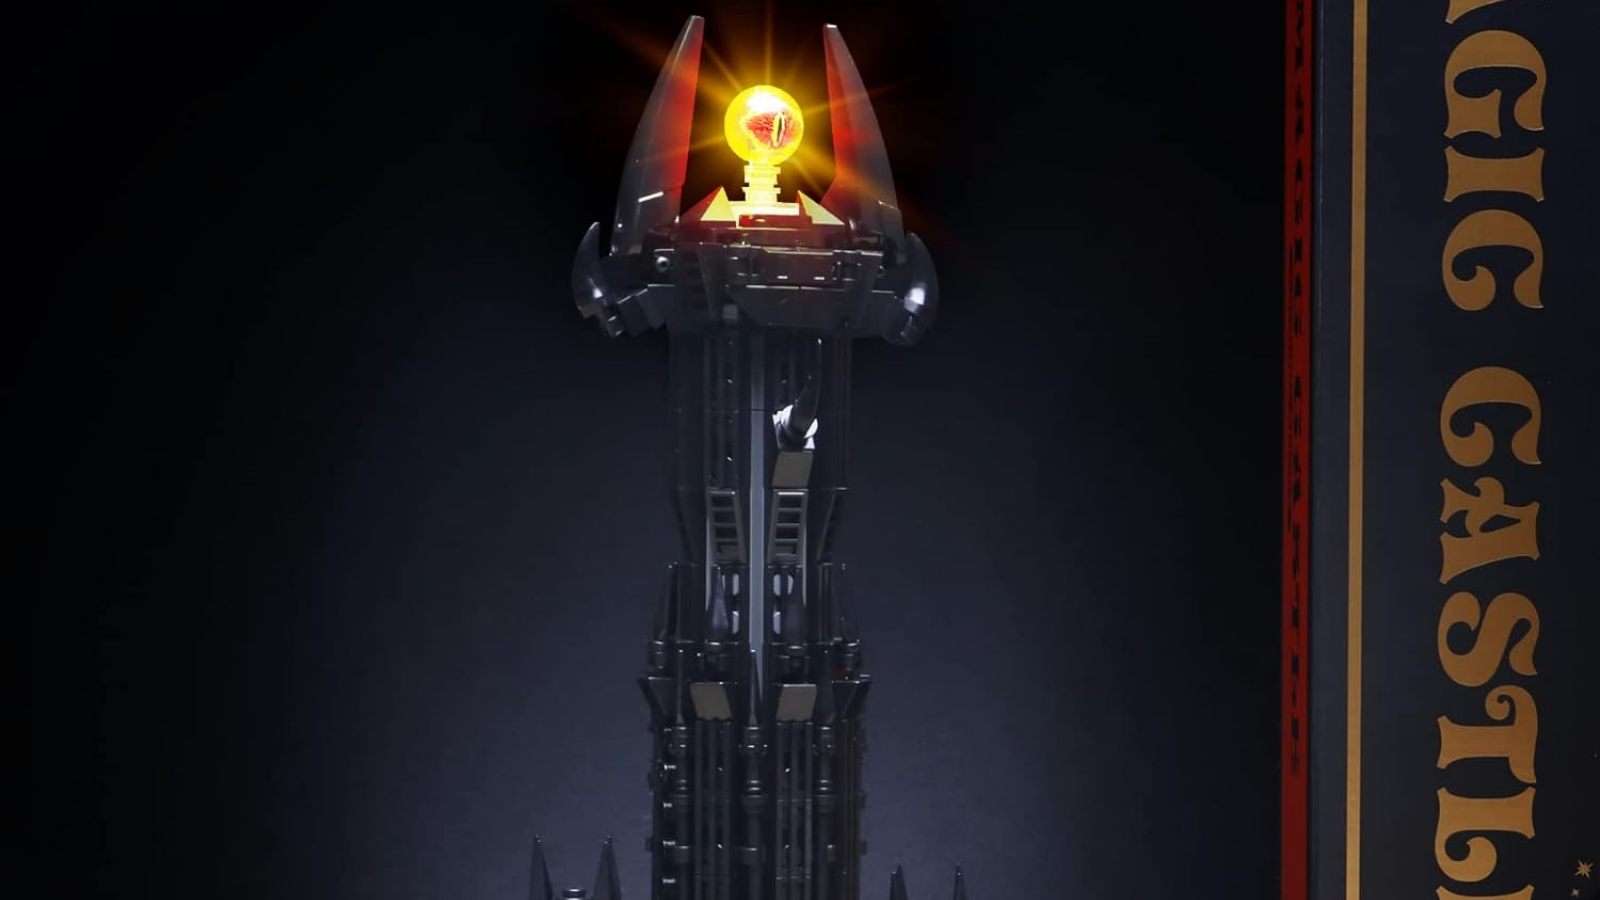 Lego-style Lord of the Rings tower with glowing eye